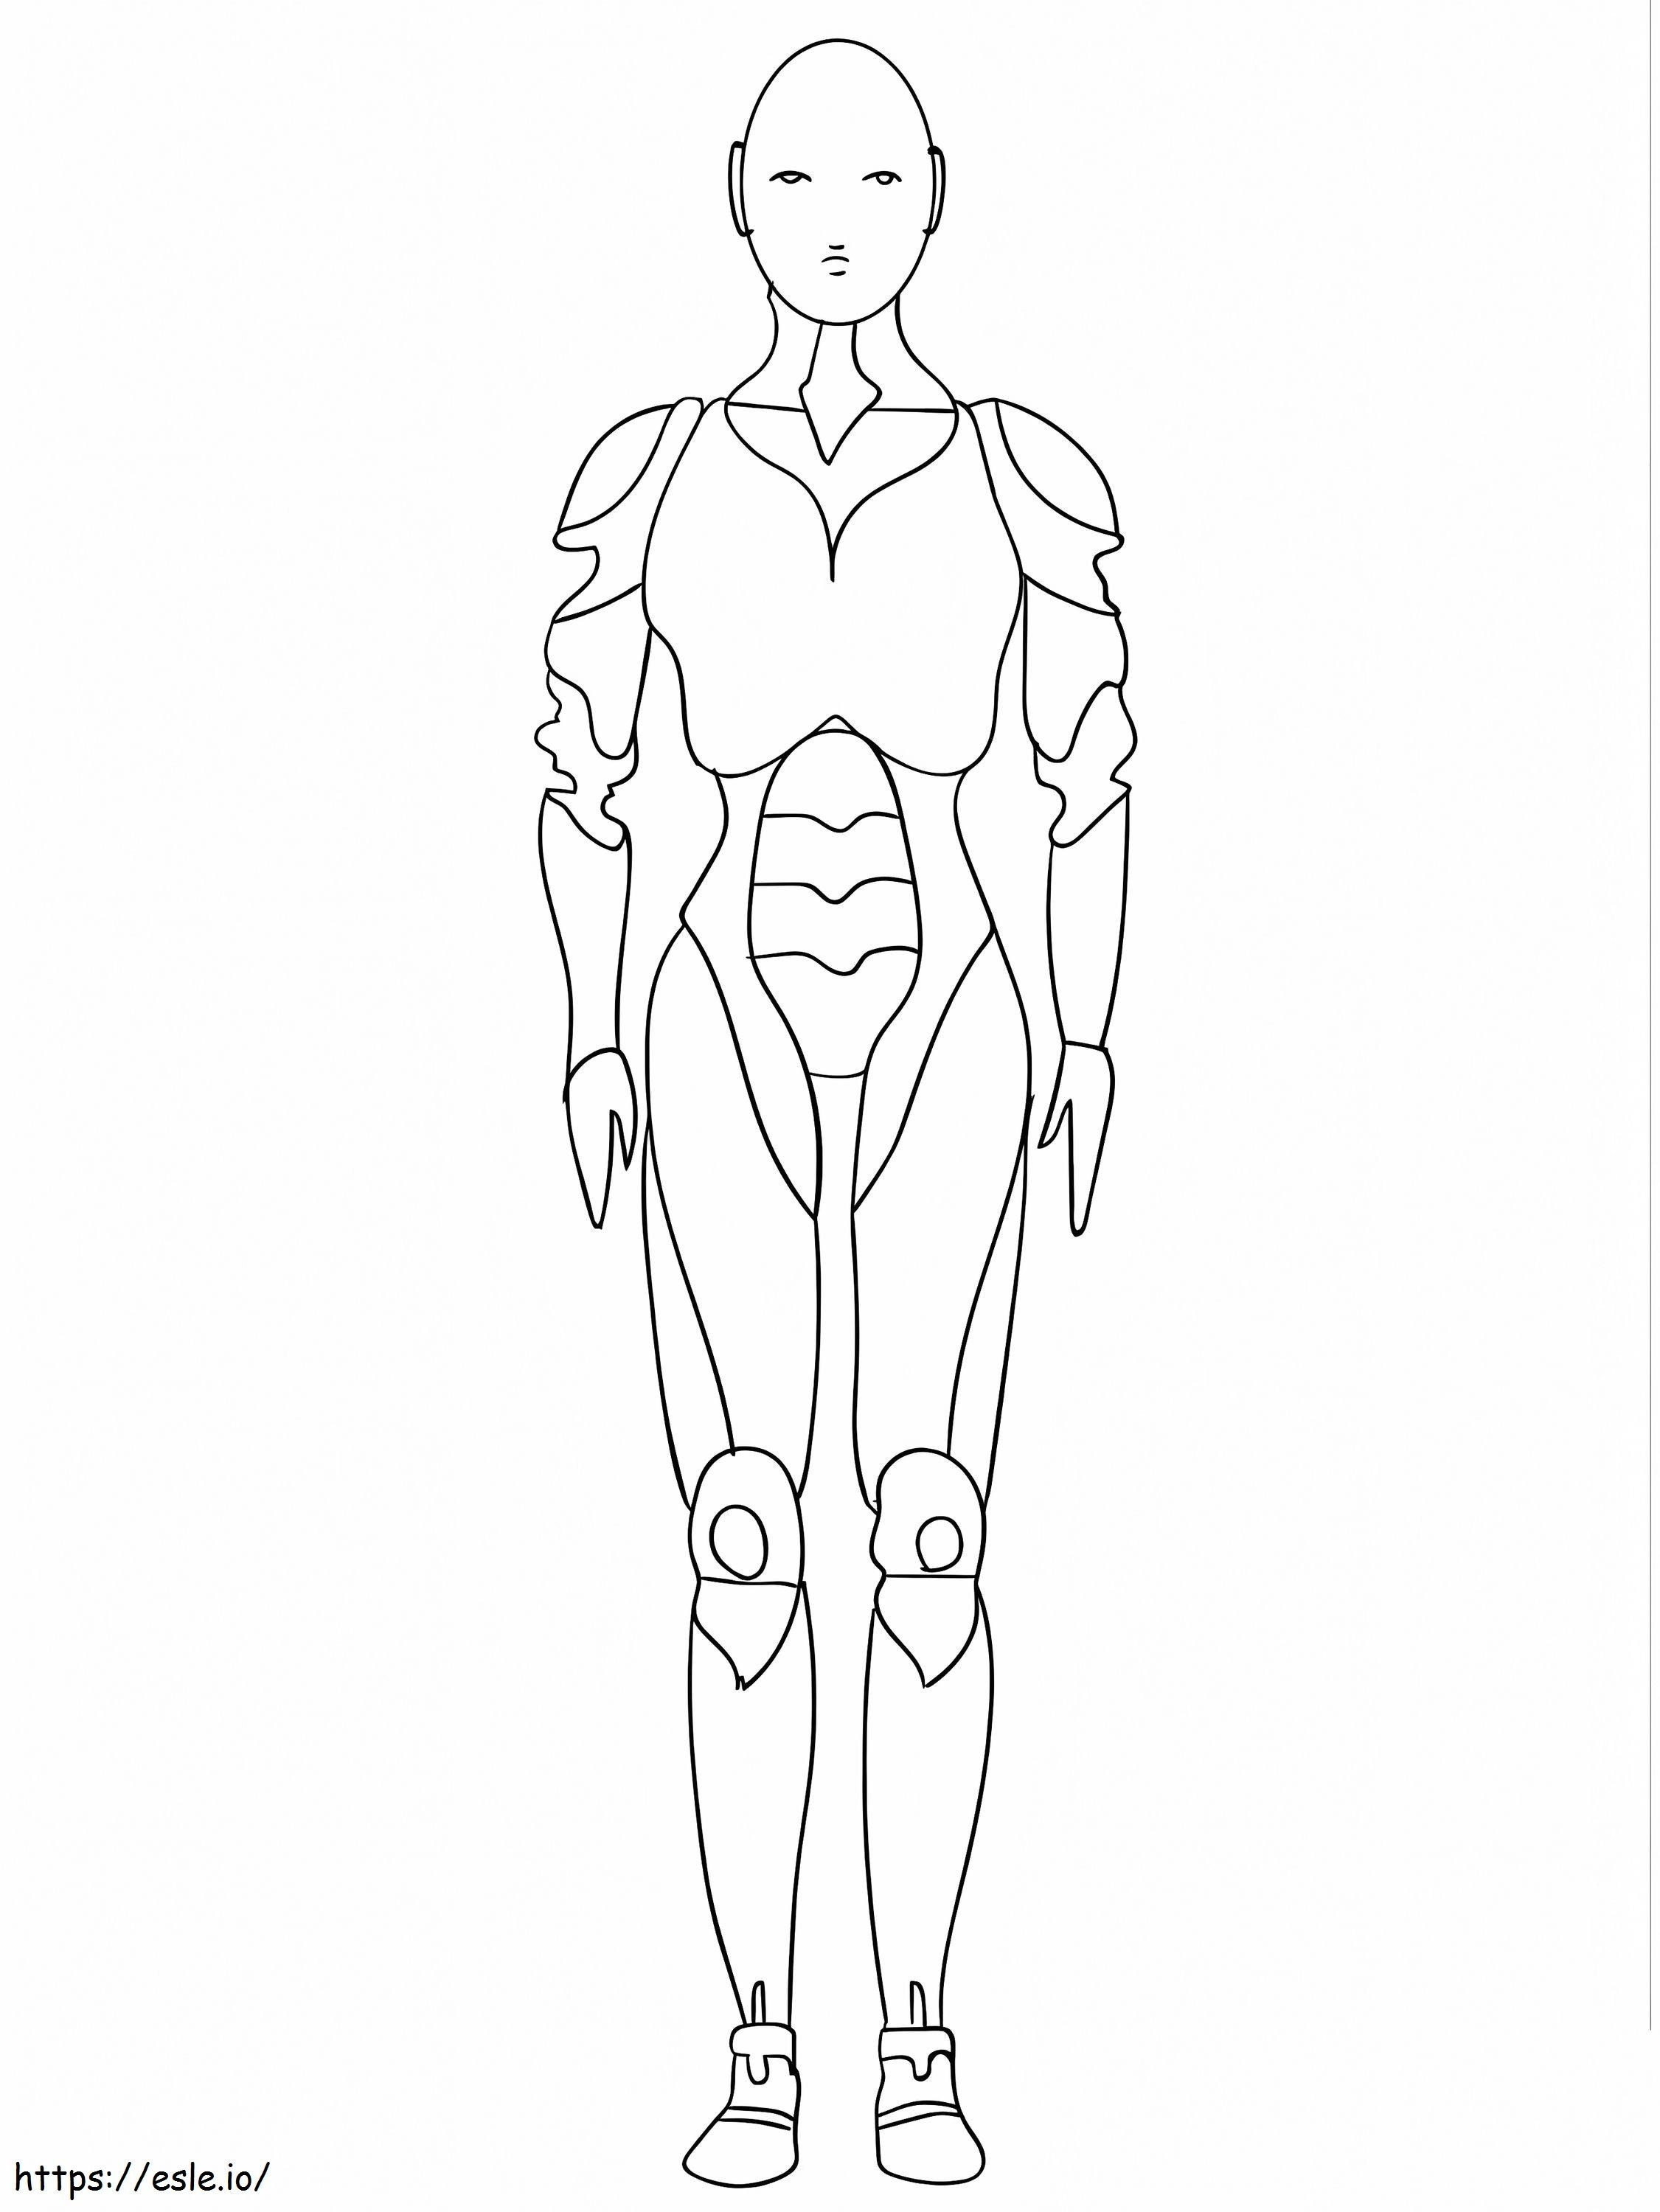 Robot Mannequin coloring page